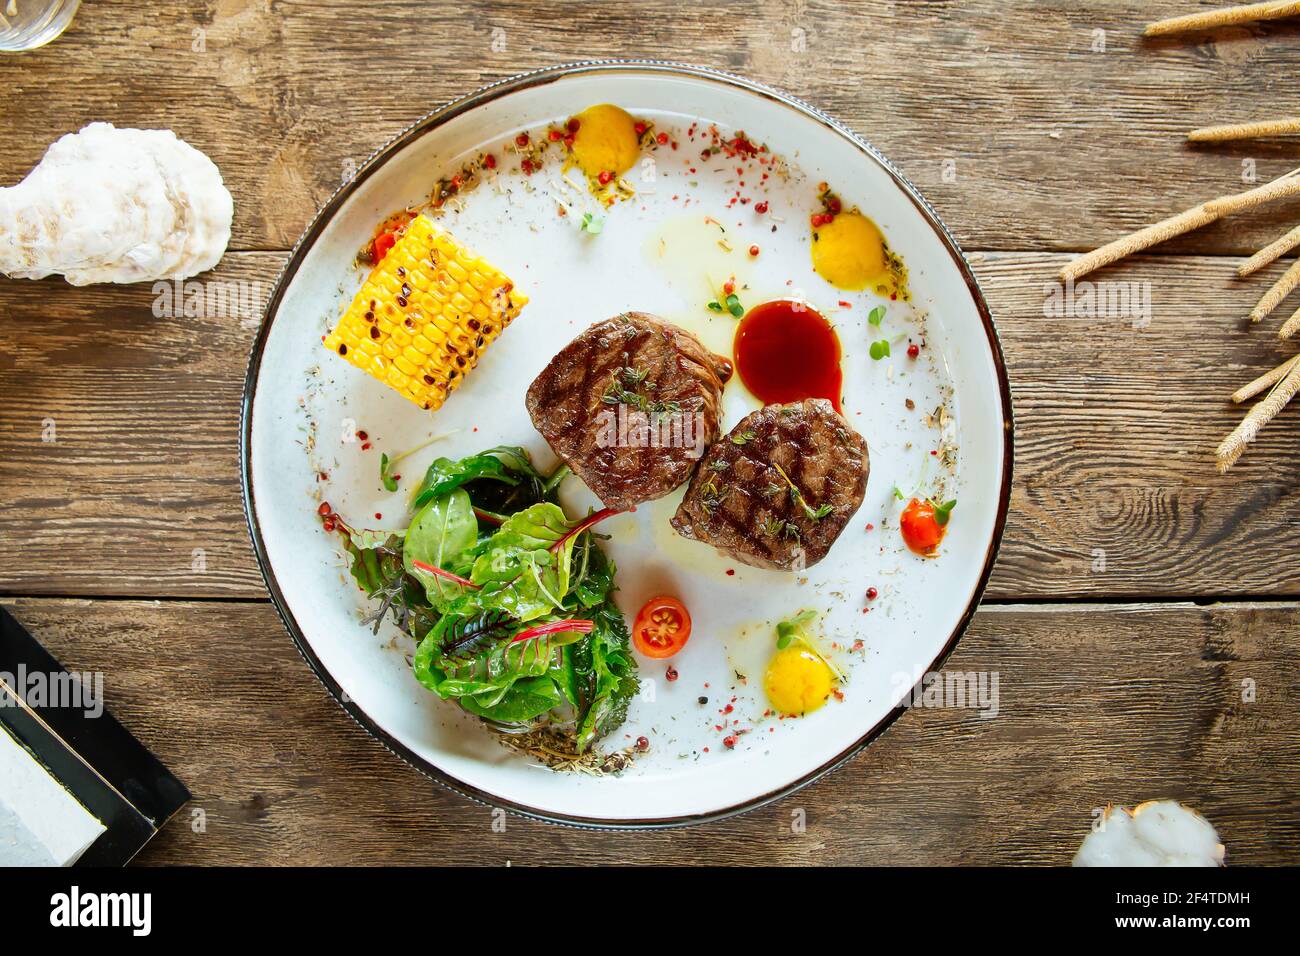 Grilled fillet mignon steaks with corn and salad Stock Photo